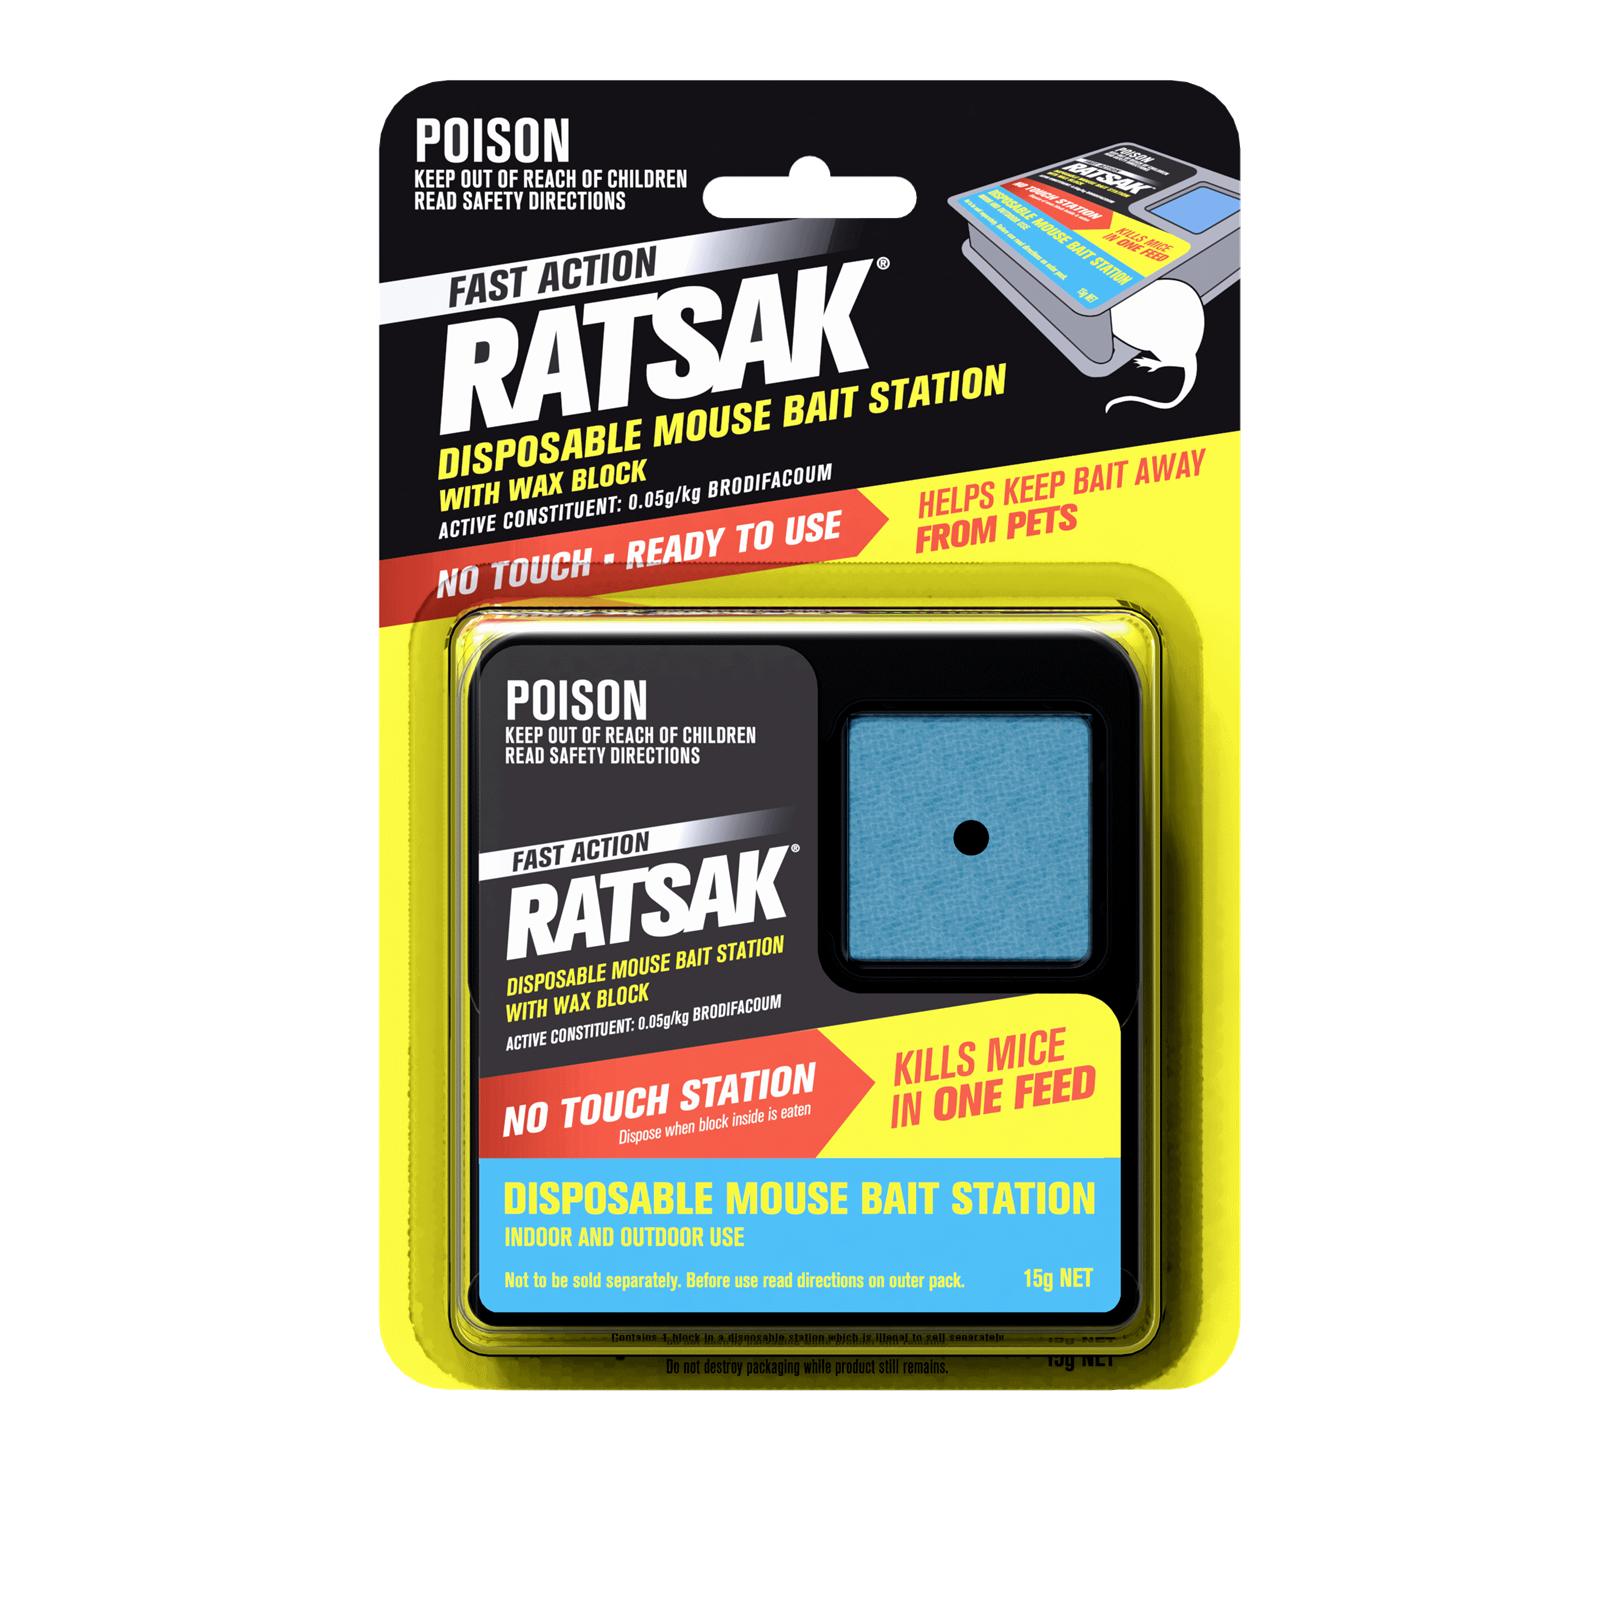 Ratsak Disposable Mouse Bait Station With Wax Block